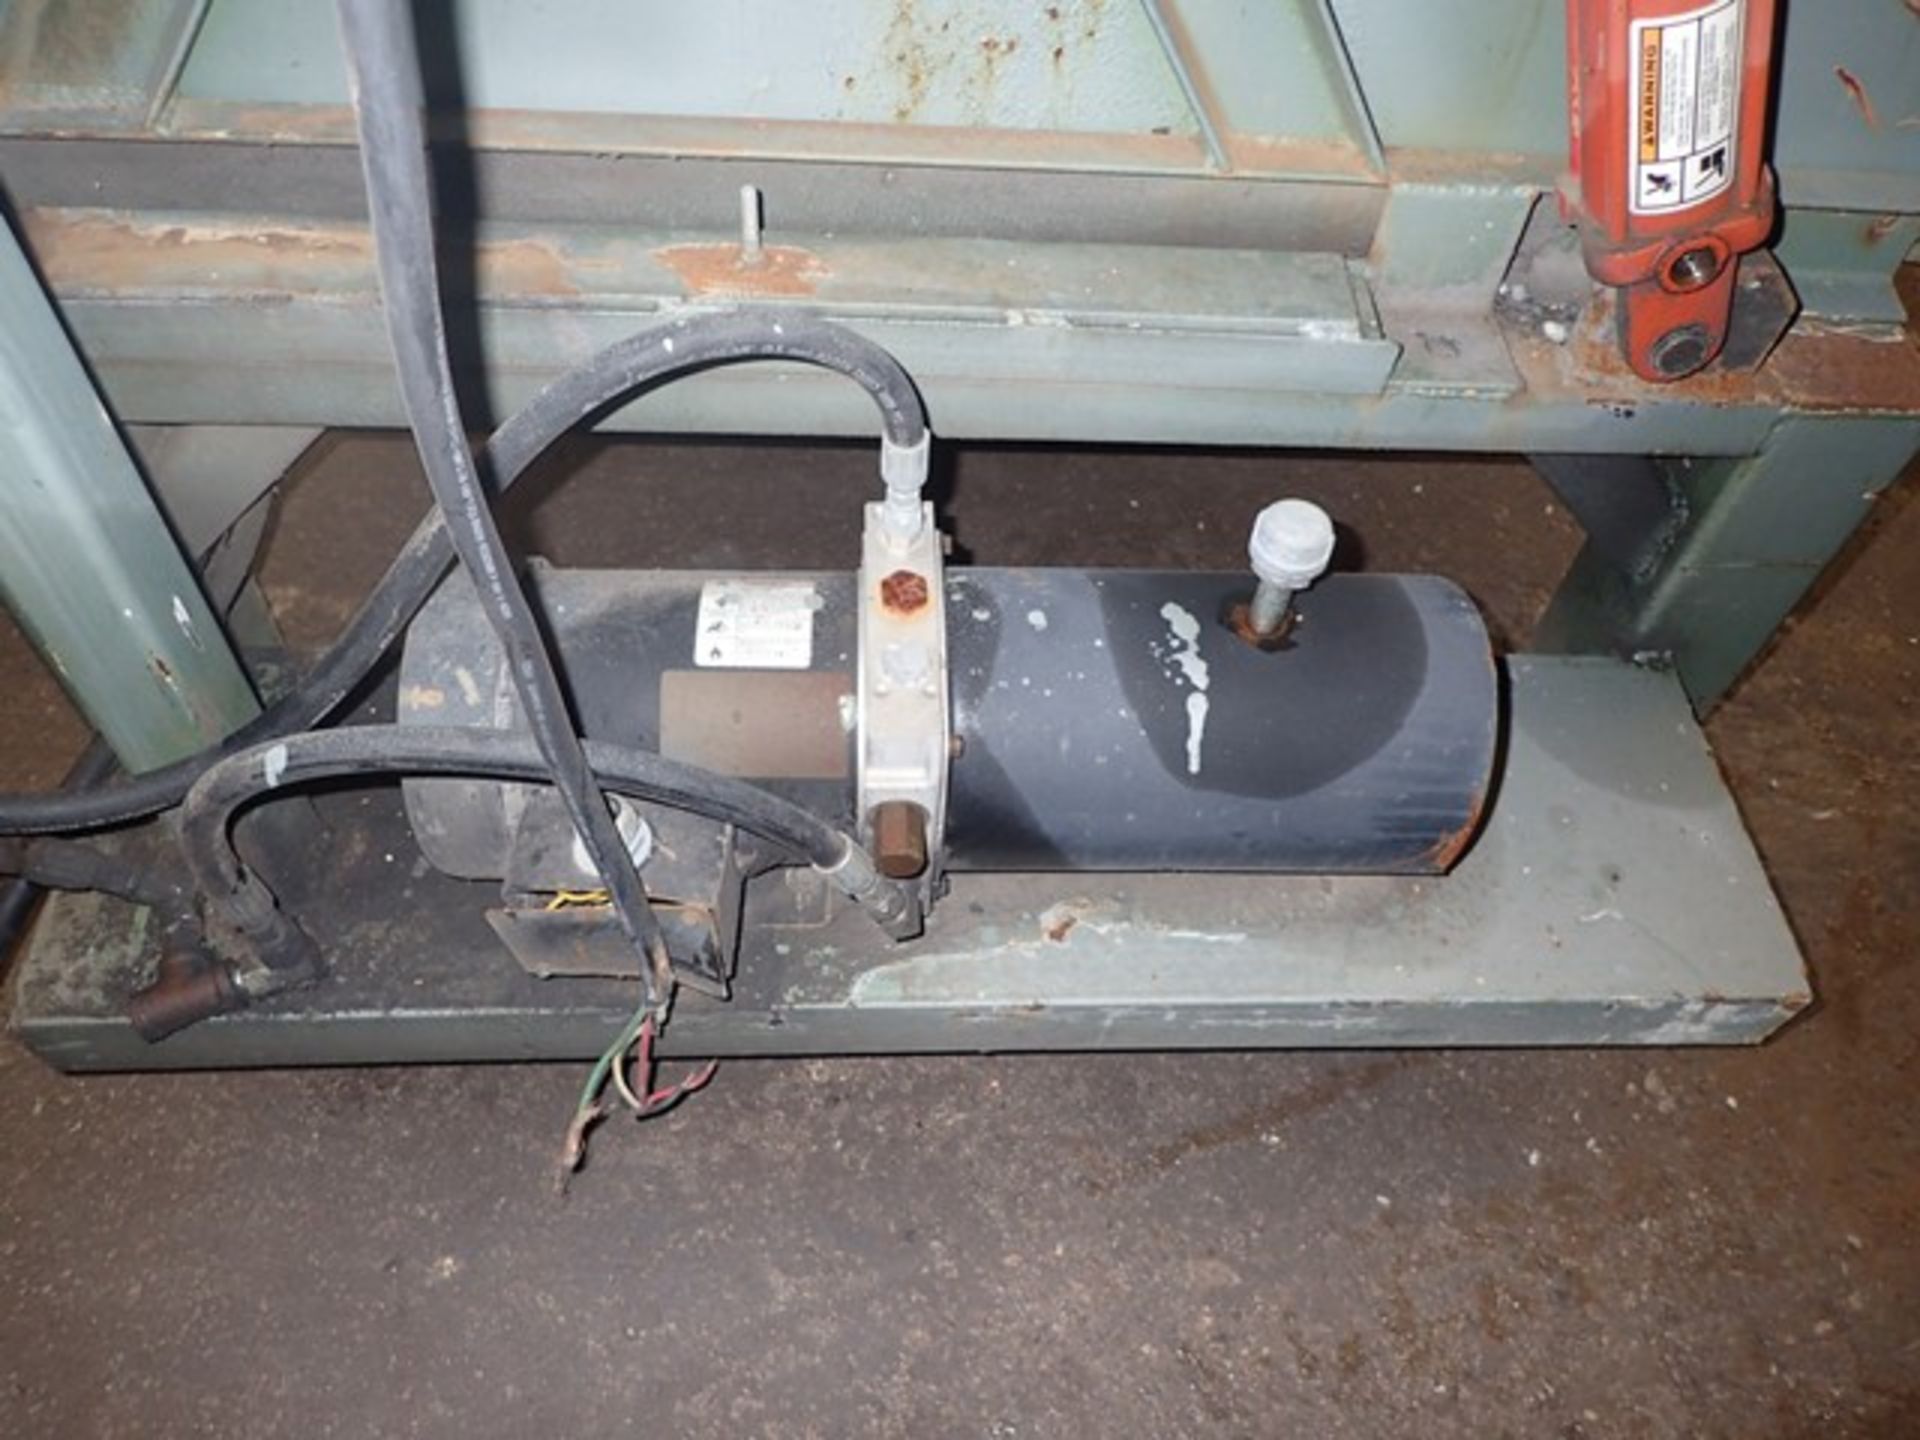 Hydraulic Box Dumper, Carbon Steel Construction - Image 5 of 5